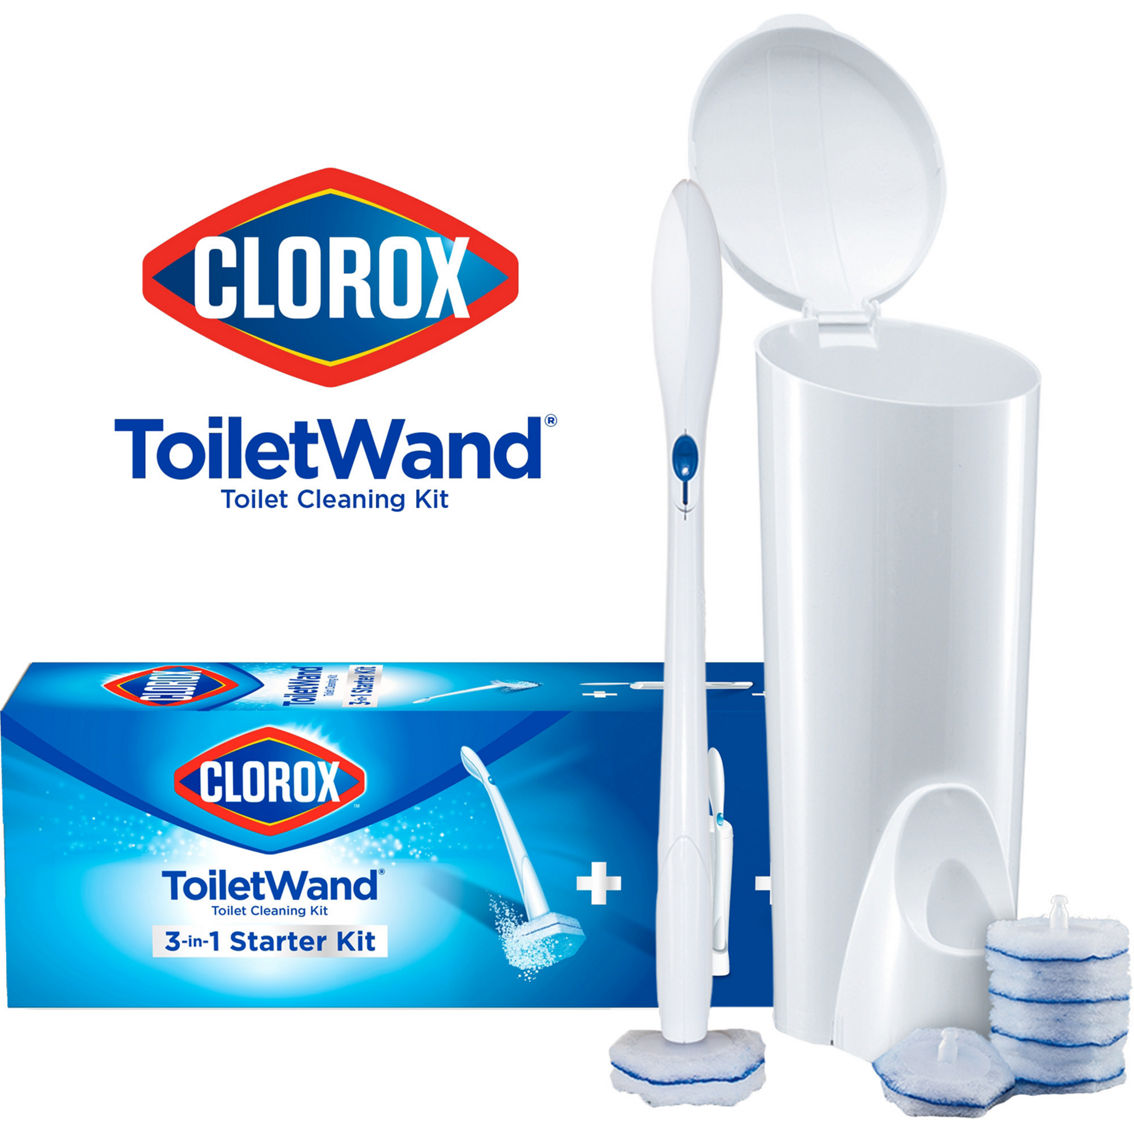 Clorox ToiletWand Starter Kit with Caddy - Image 2 of 2